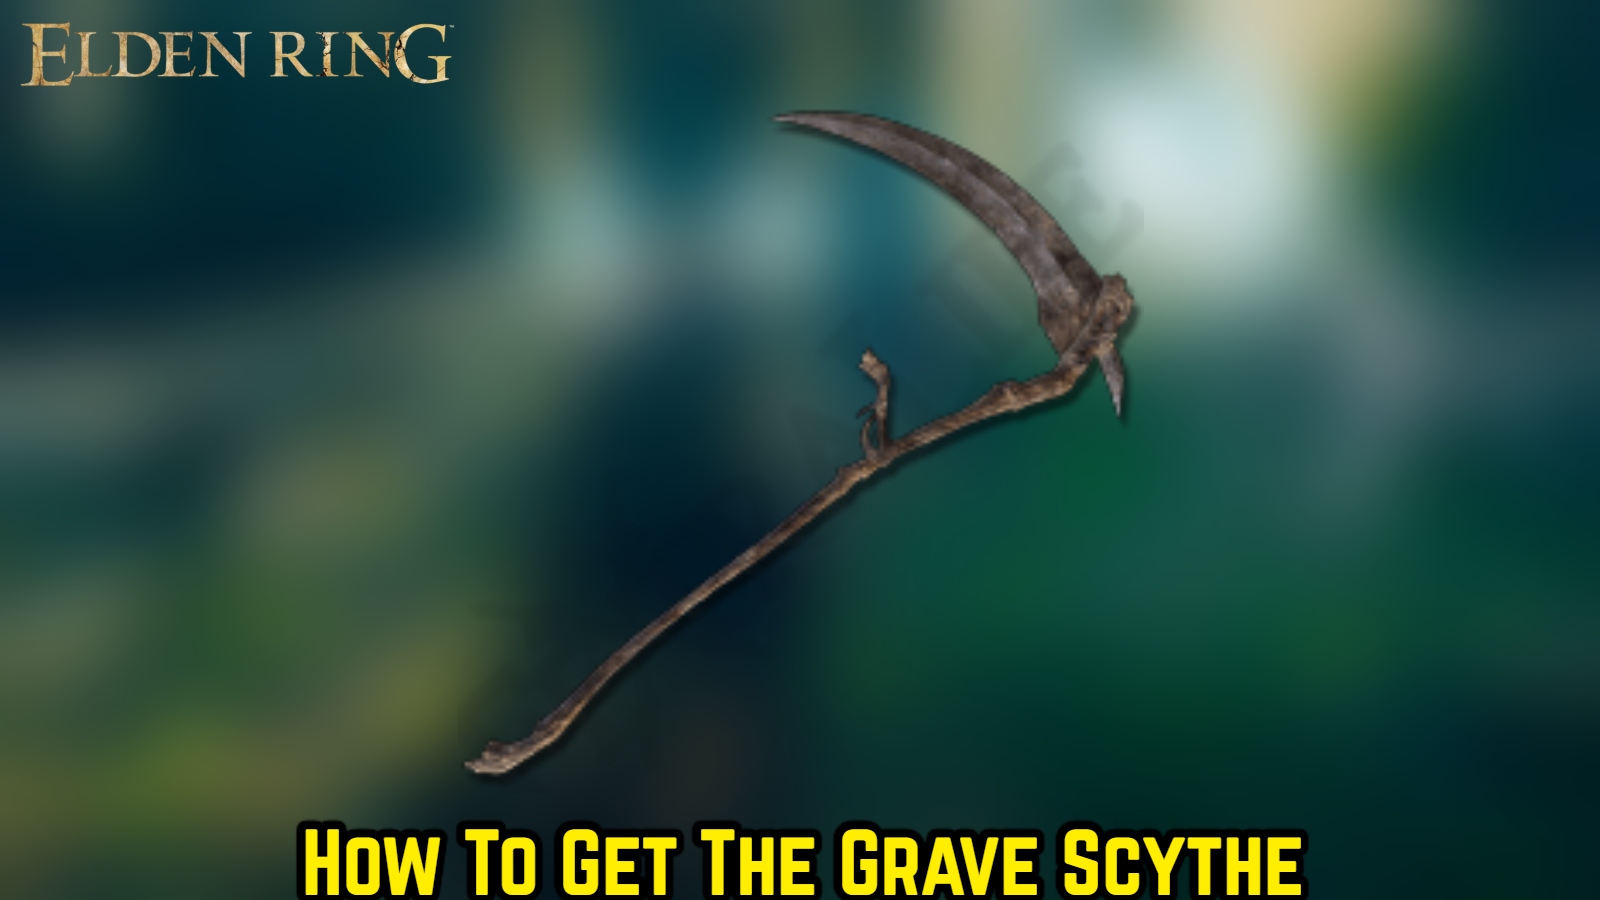 You are currently viewing How To Get The Grave Scythe in Elden Ring